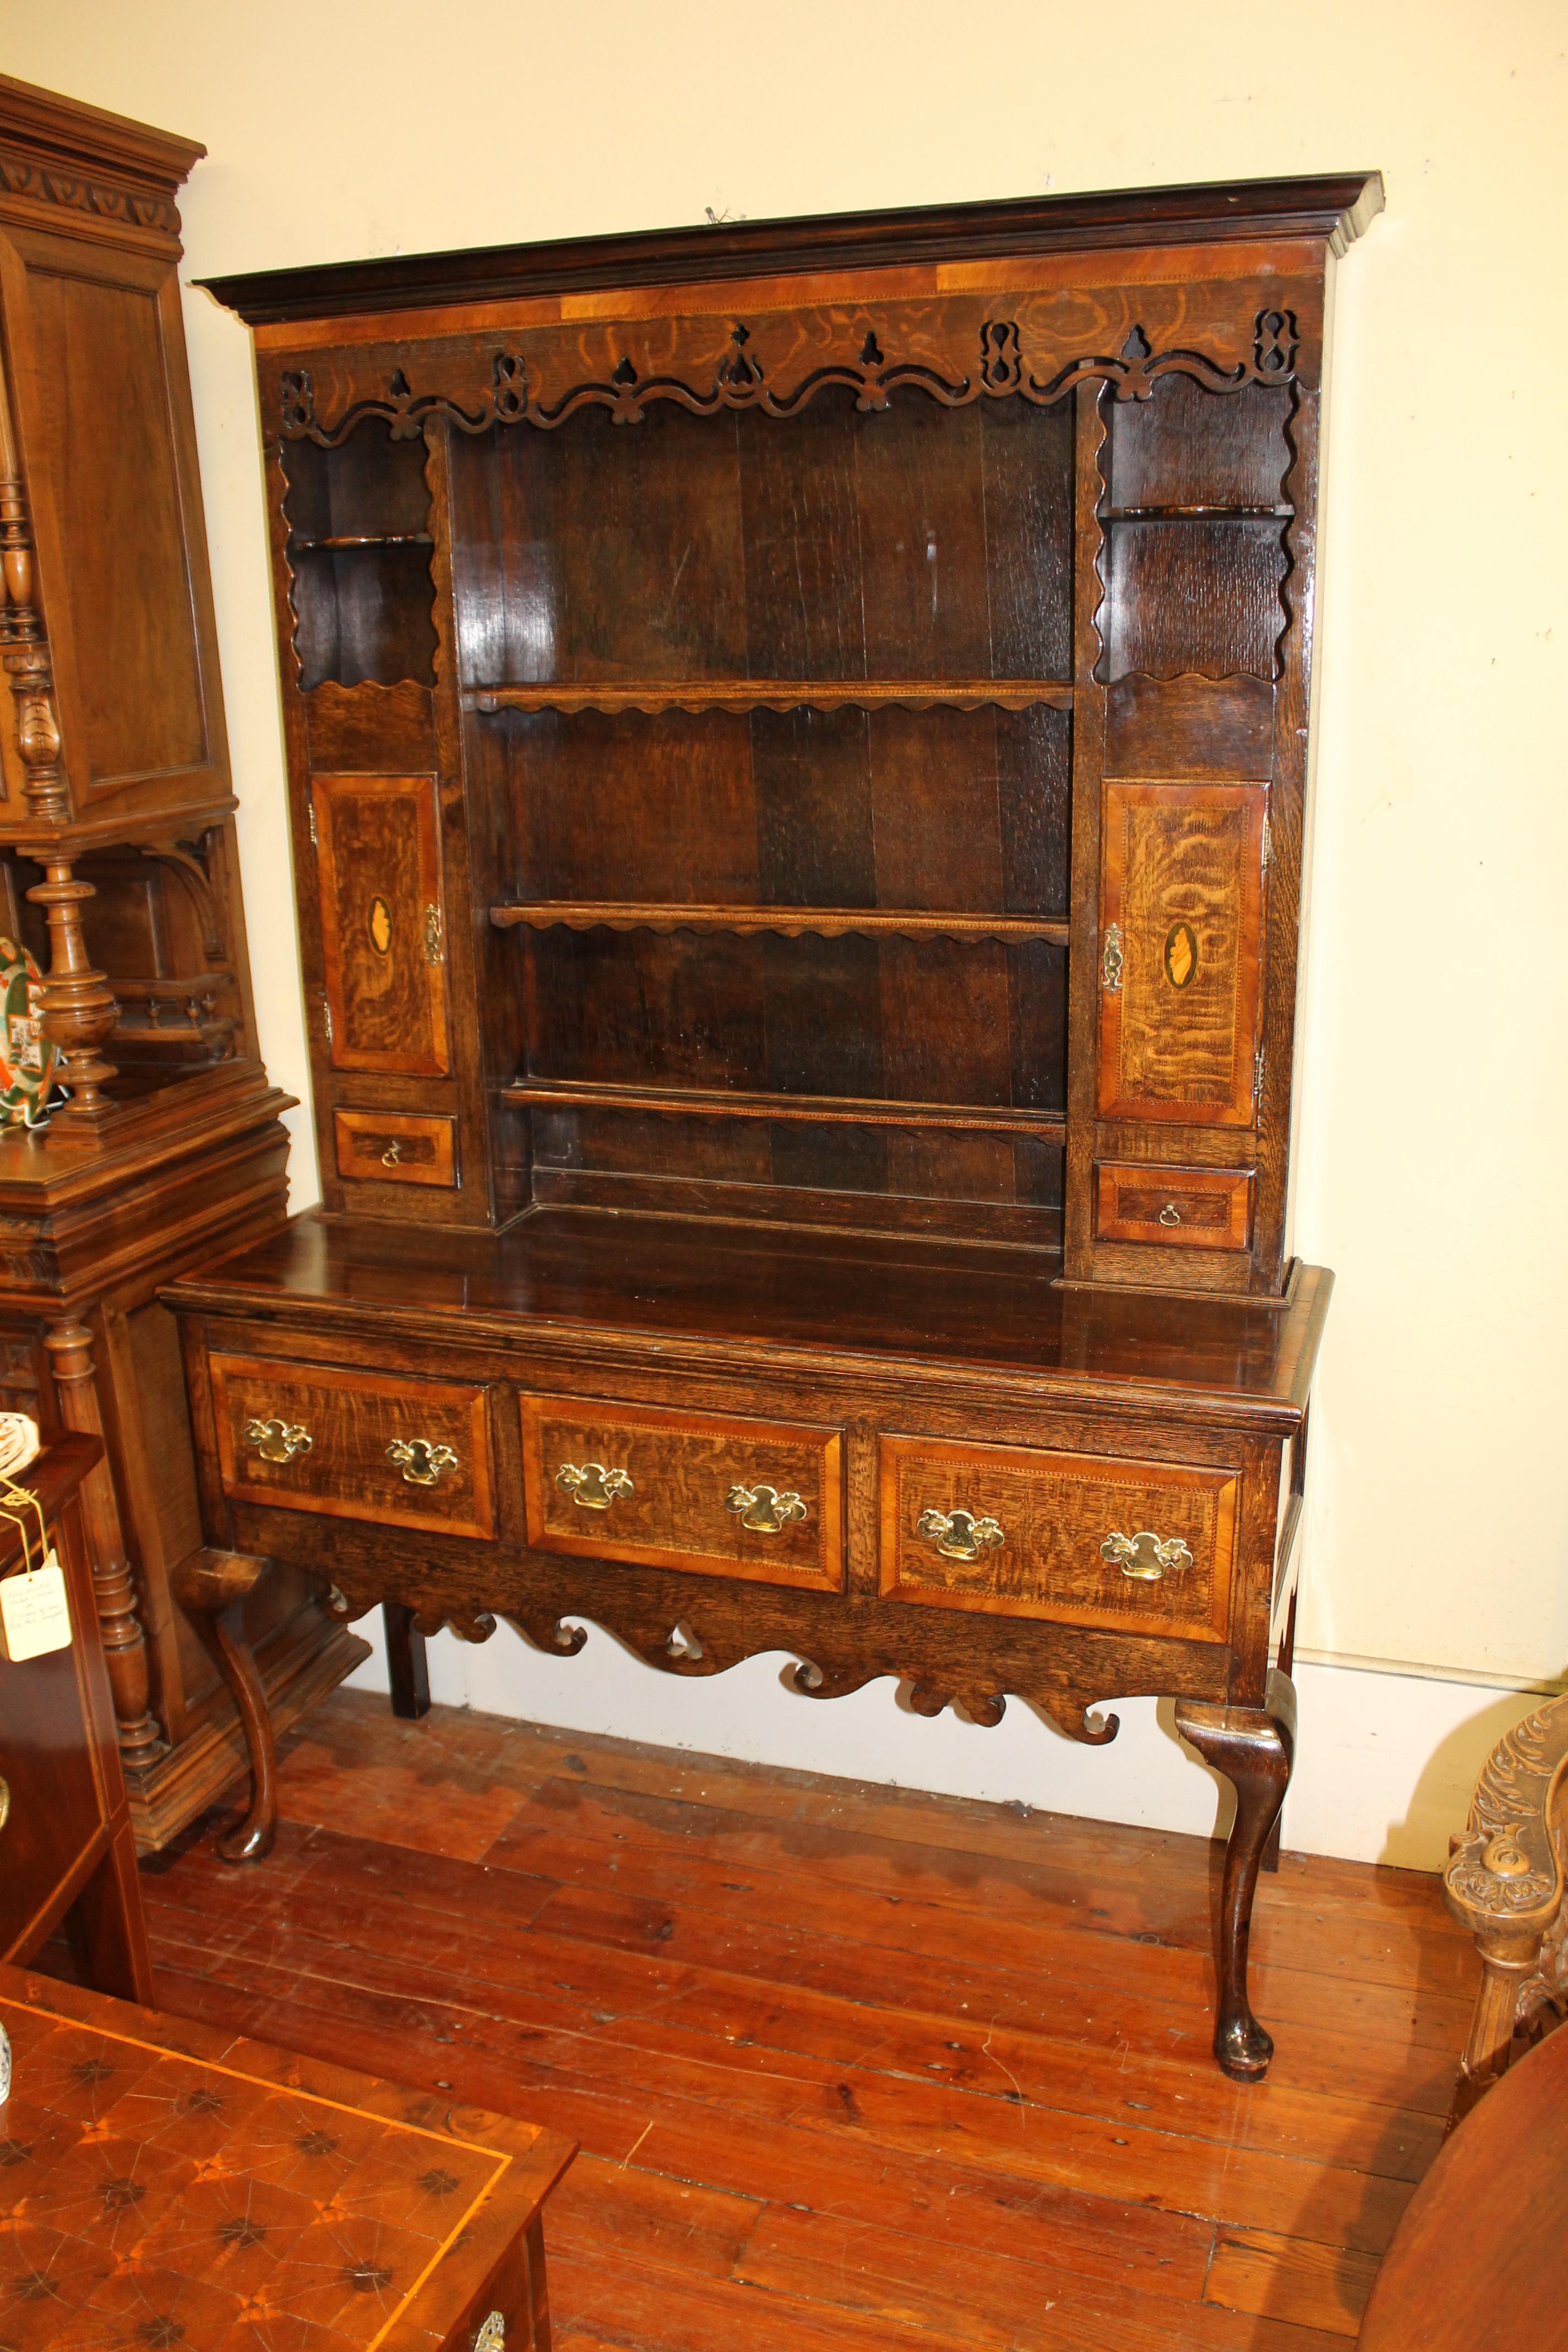 Fabulous quality and superb color antique English Lancashire region inlaid and cross-banded oak welsh dresser and rack with pierced cornice frieze and shaped and carved apron

Standing upon Queen Anne style cabriole legs. Handsome 